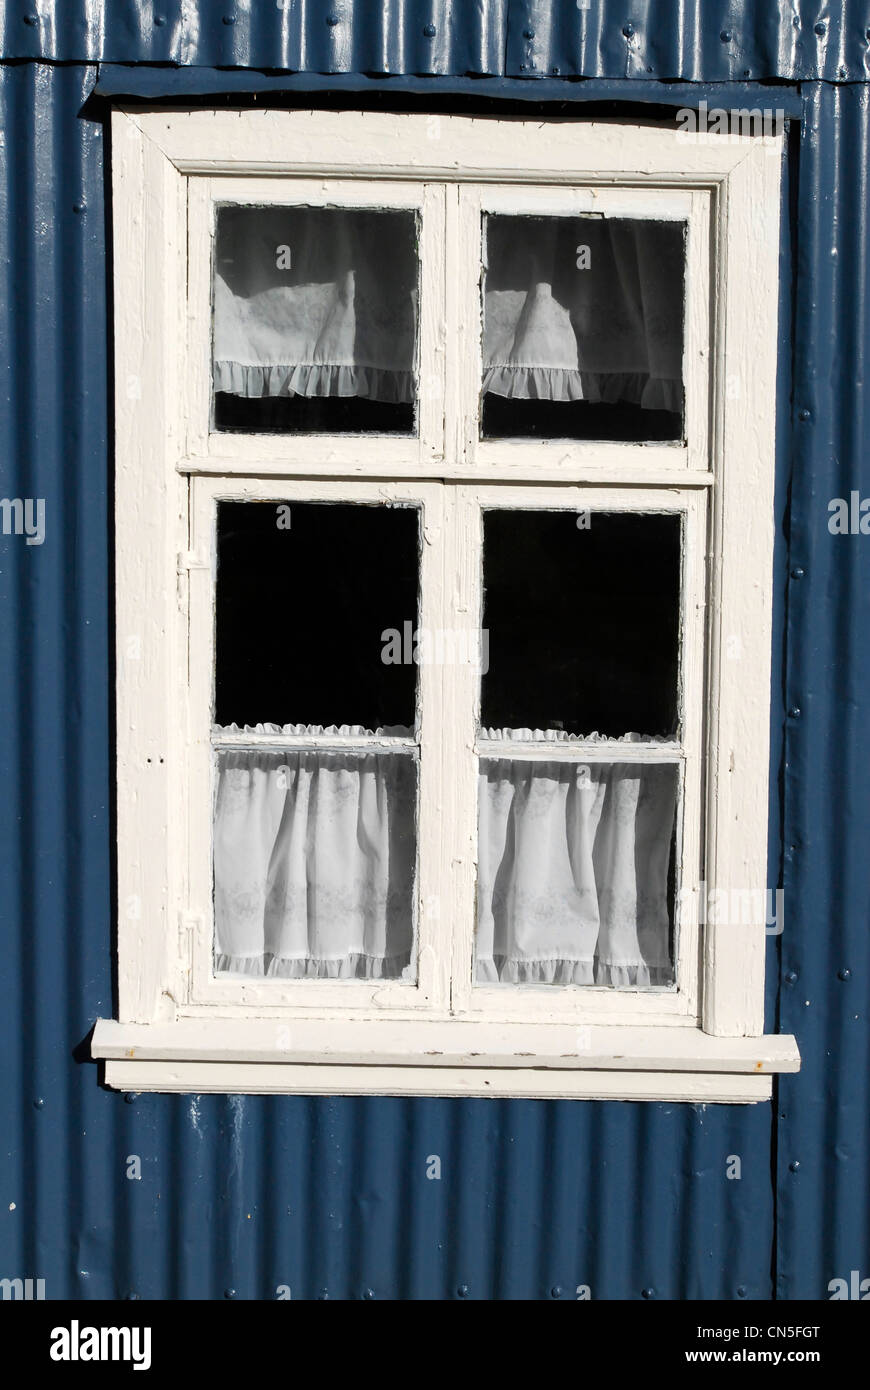 Iceland, Austurland Region, Faskrudsfjordur, wooden window painted in white and wall of sheet steel paints in blue Stock Photo